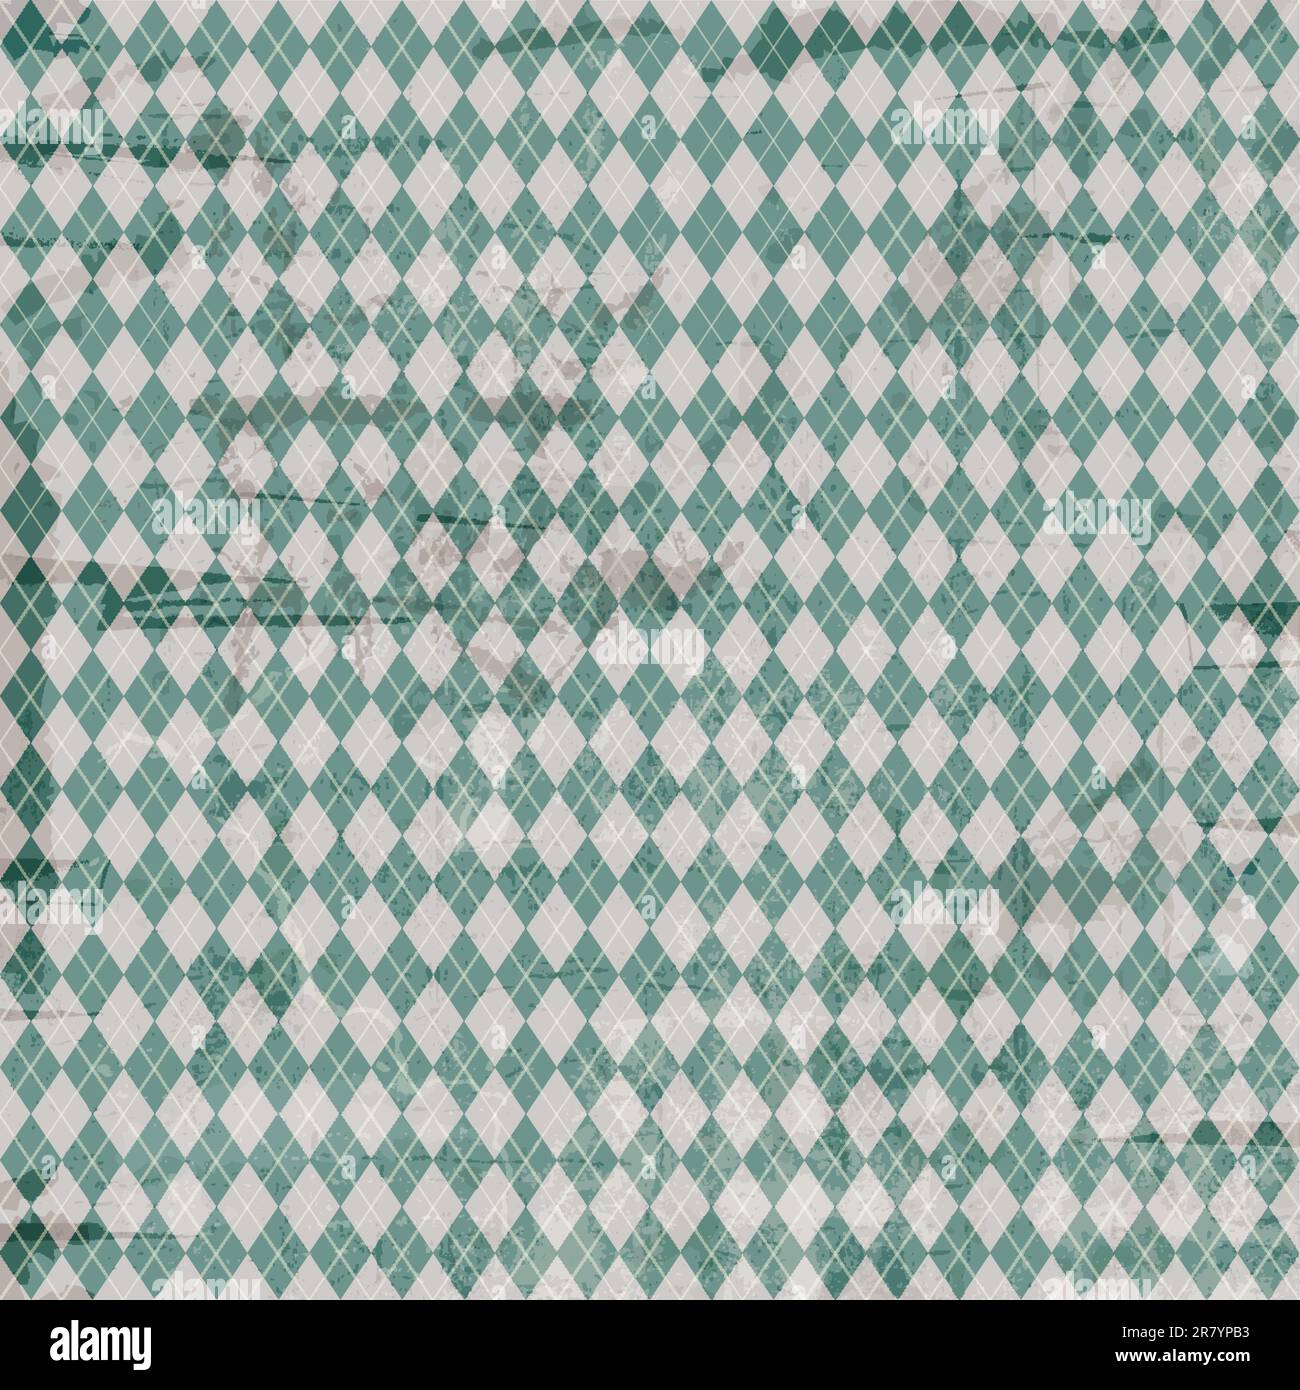 Vintage background with an argyle style pattern Stock Vector